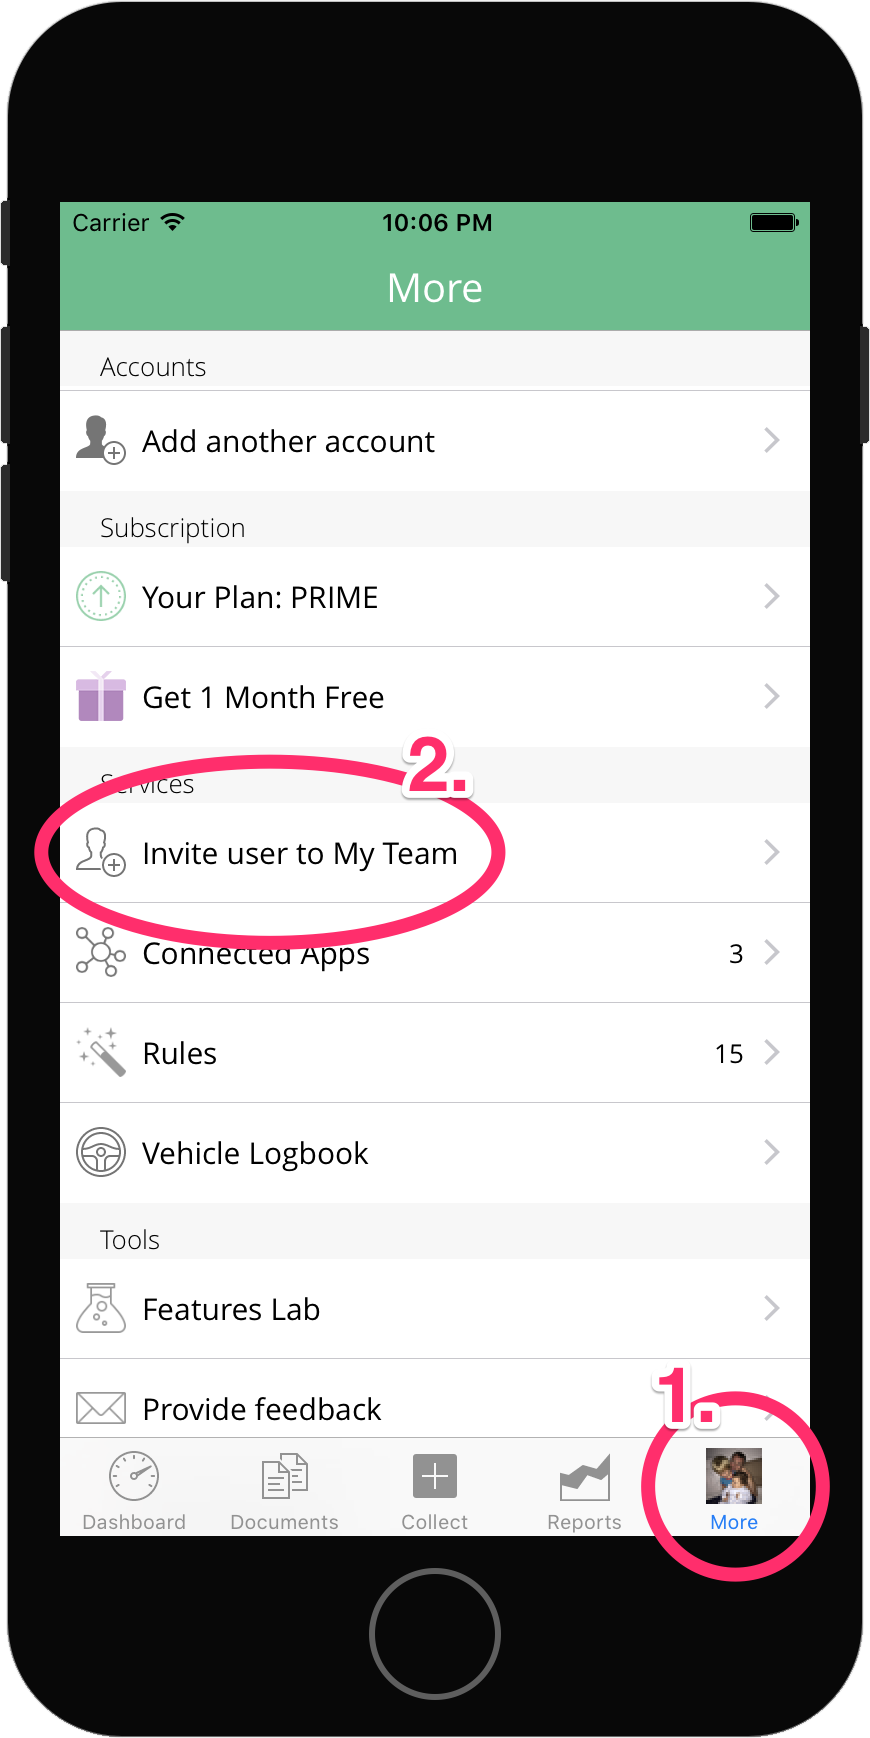 My Team invite is inside mobile More view